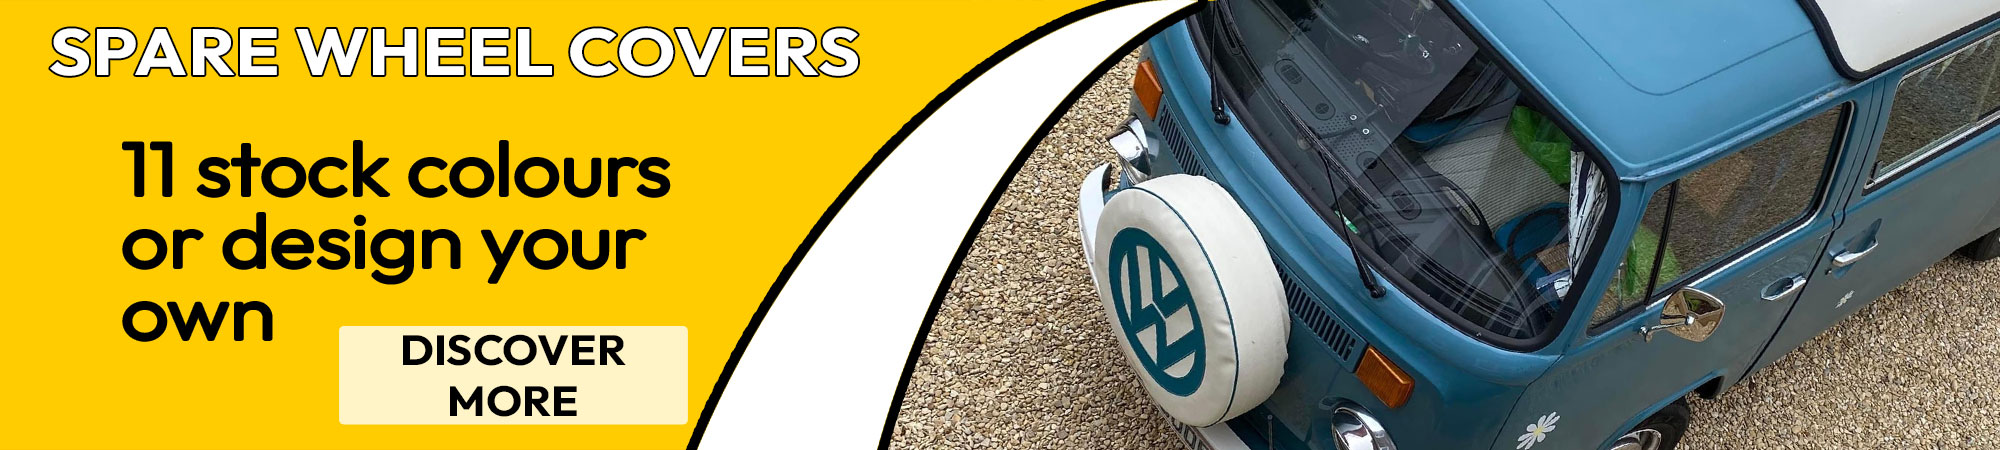 Spare wheel cover picture for volkswagen baywindow campers